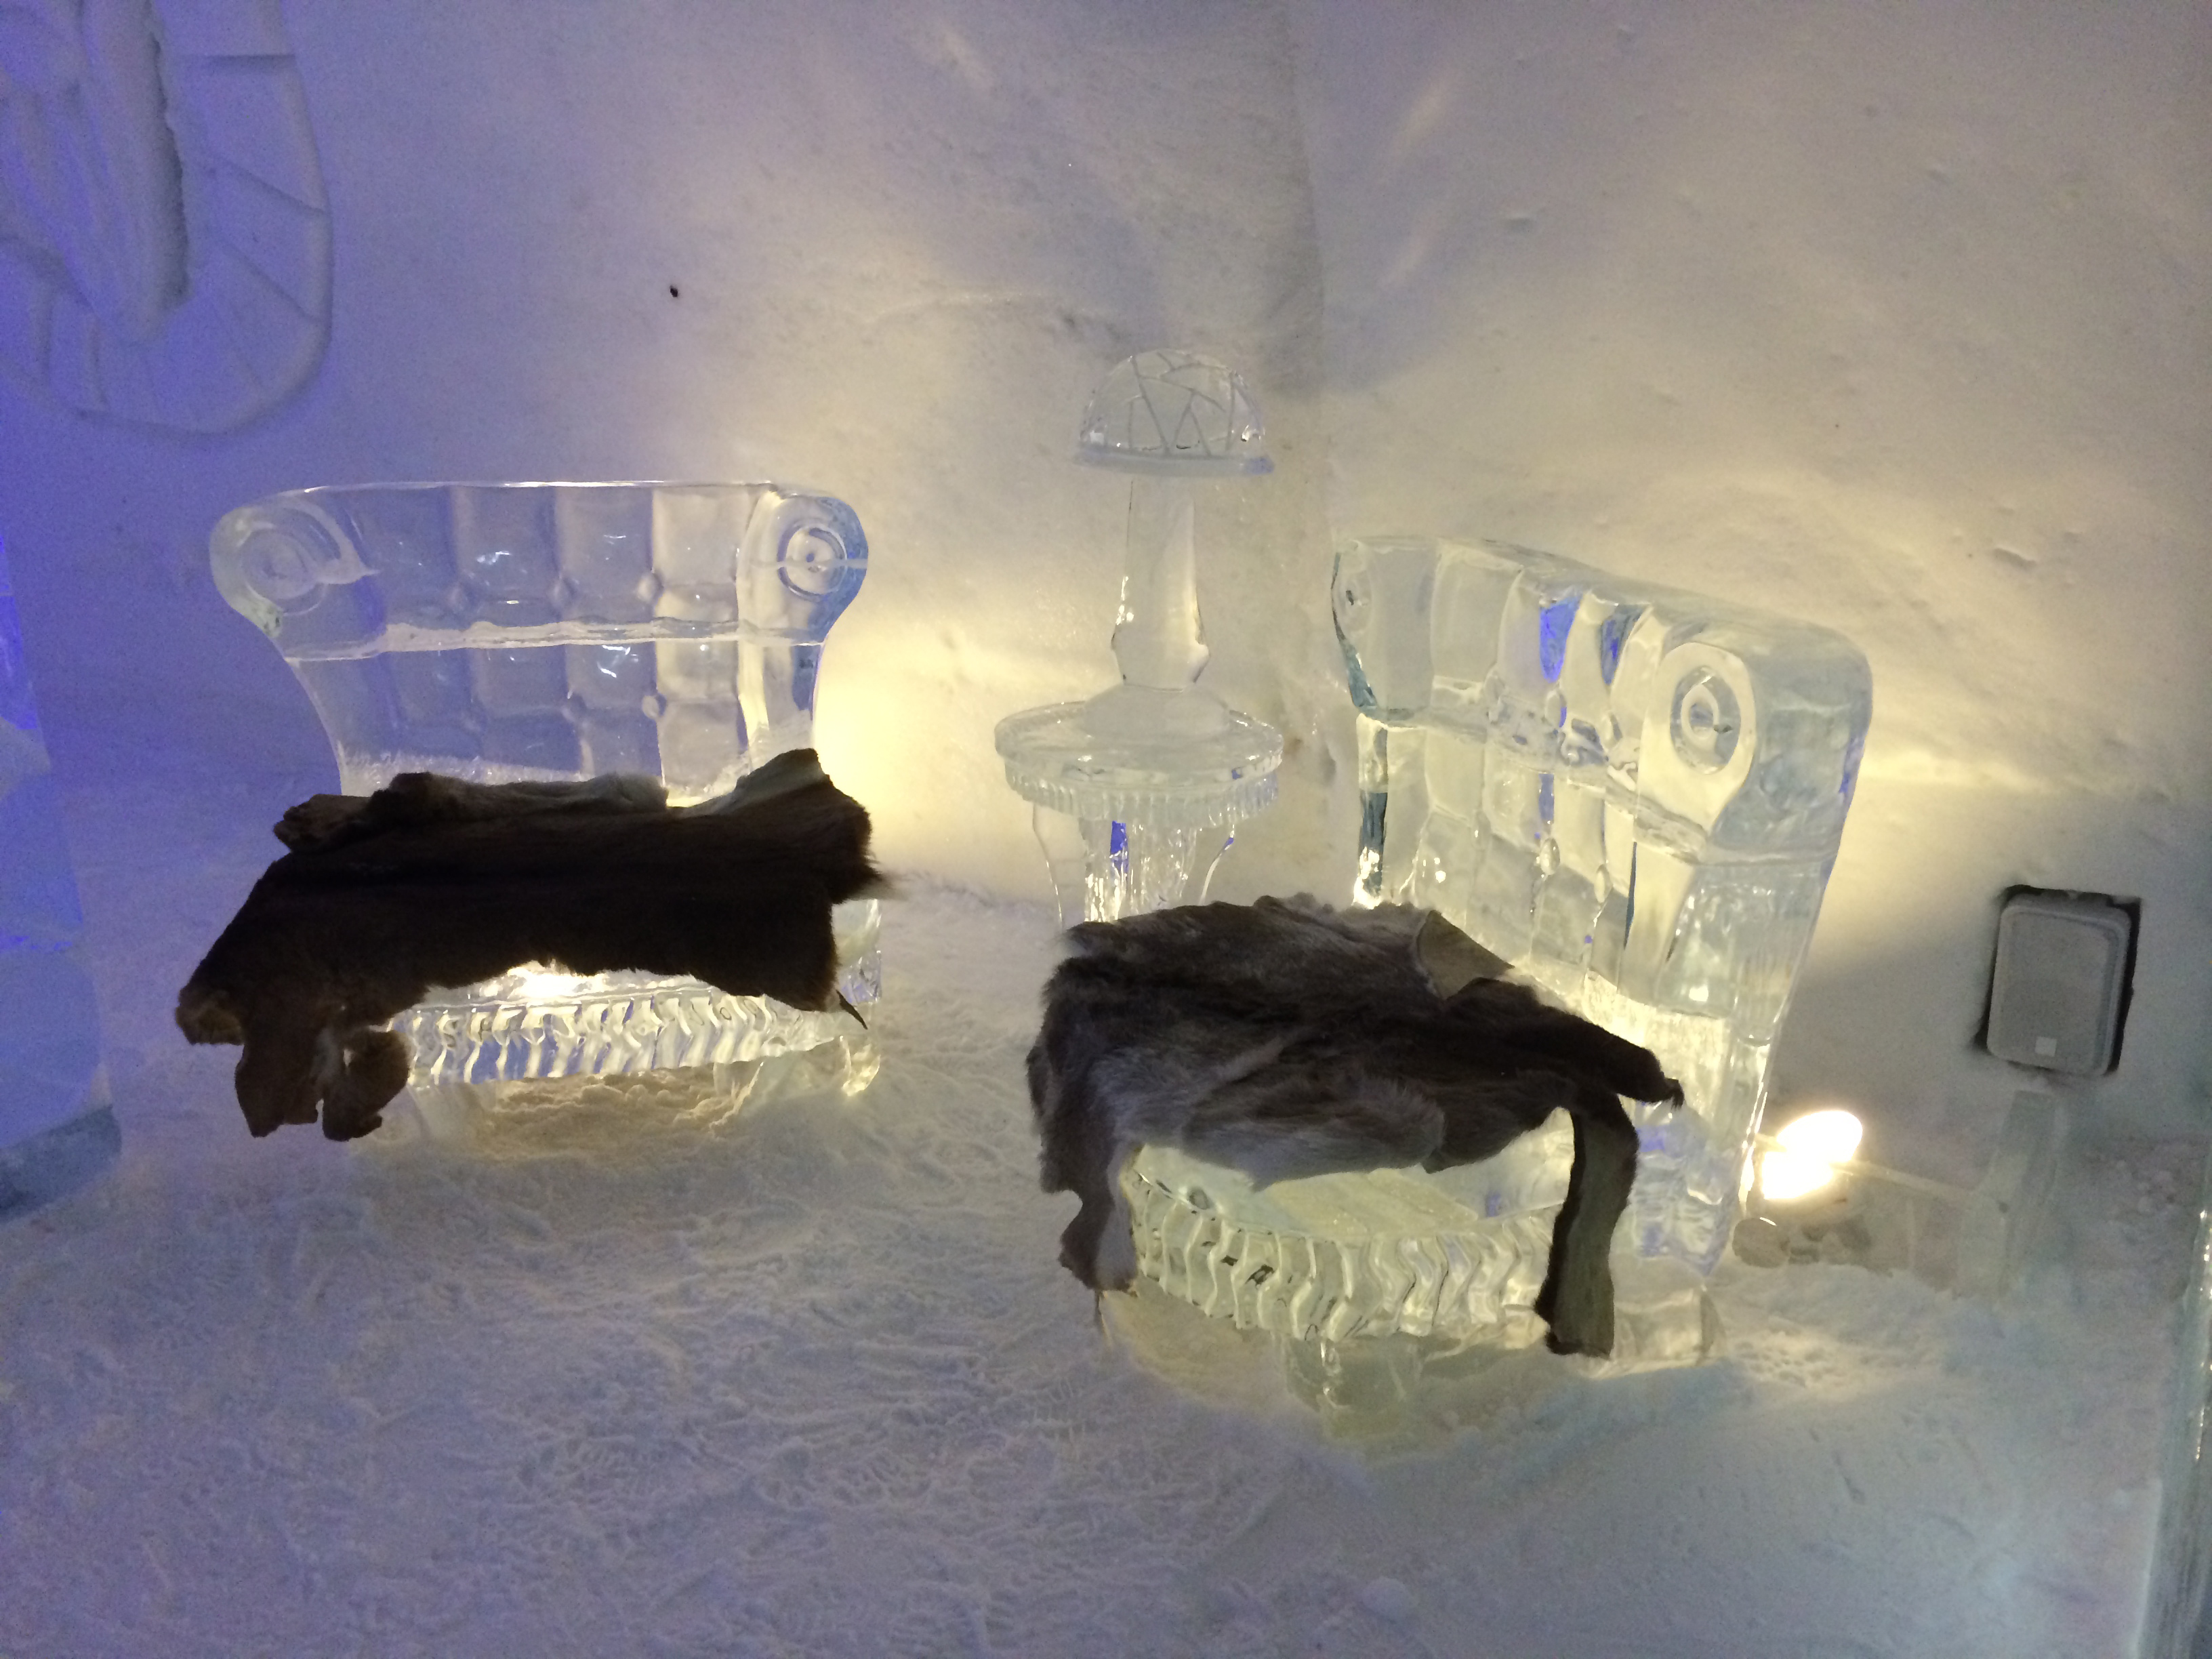 The Incredible Ice Hotel That Inspired Elsa’s “Frozen” Palace